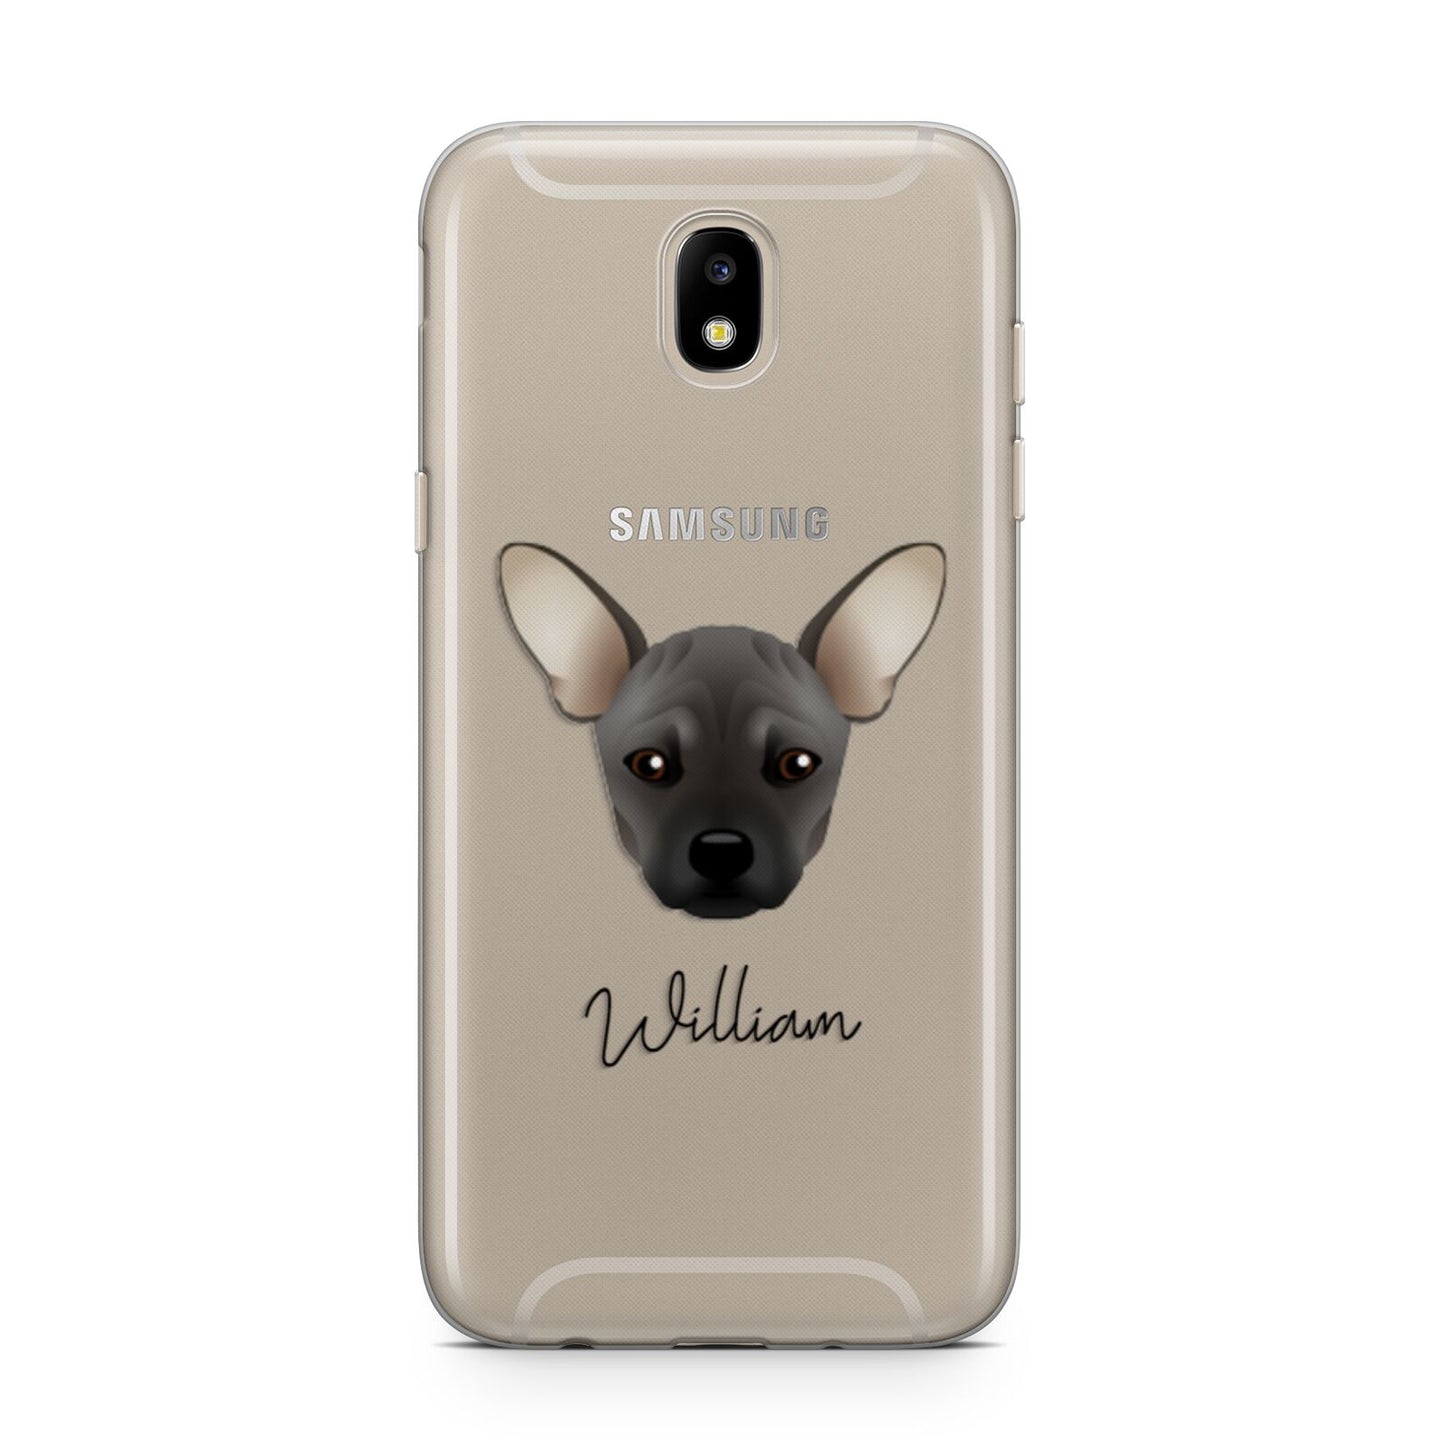 French Pin Personalised Samsung J5 2017 Case